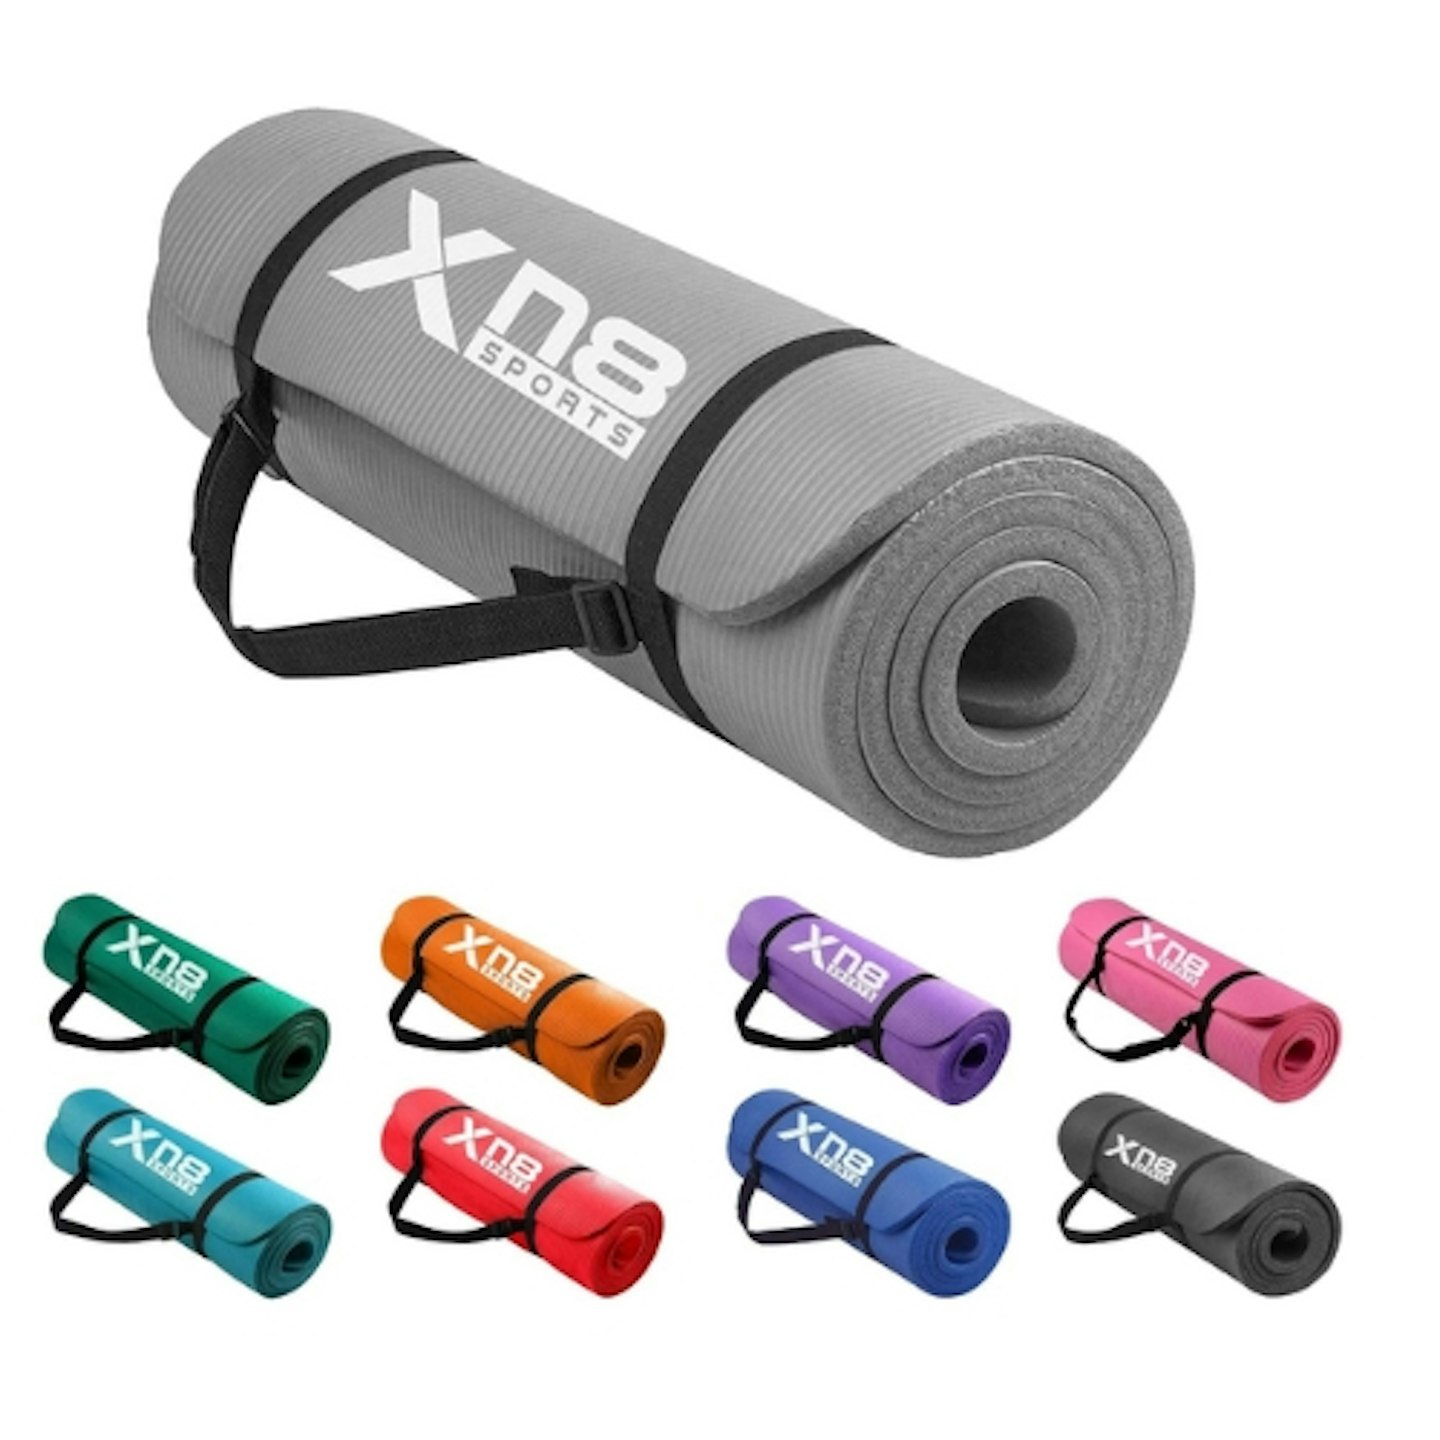 Xn8 Yoga Mat 15mm Thick NBR Exercise Mat with Carrying Strap